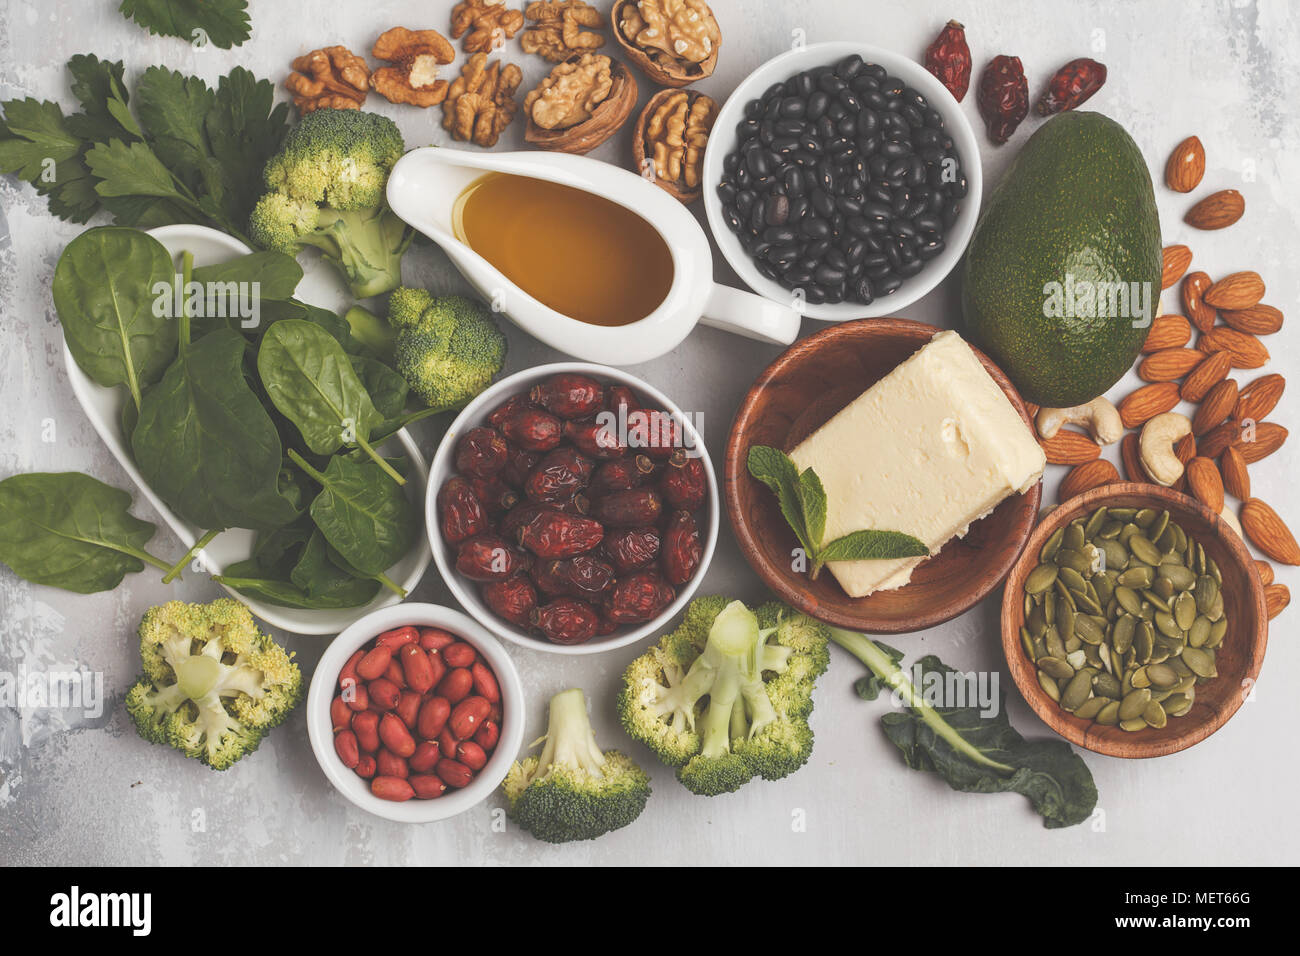 Healthy food nutrition dieting concept. Assortment of high vitamin E sources. Oil, nuts, avocado, butter, healthy fats, rose hips, parsley, seeds Stock Photo